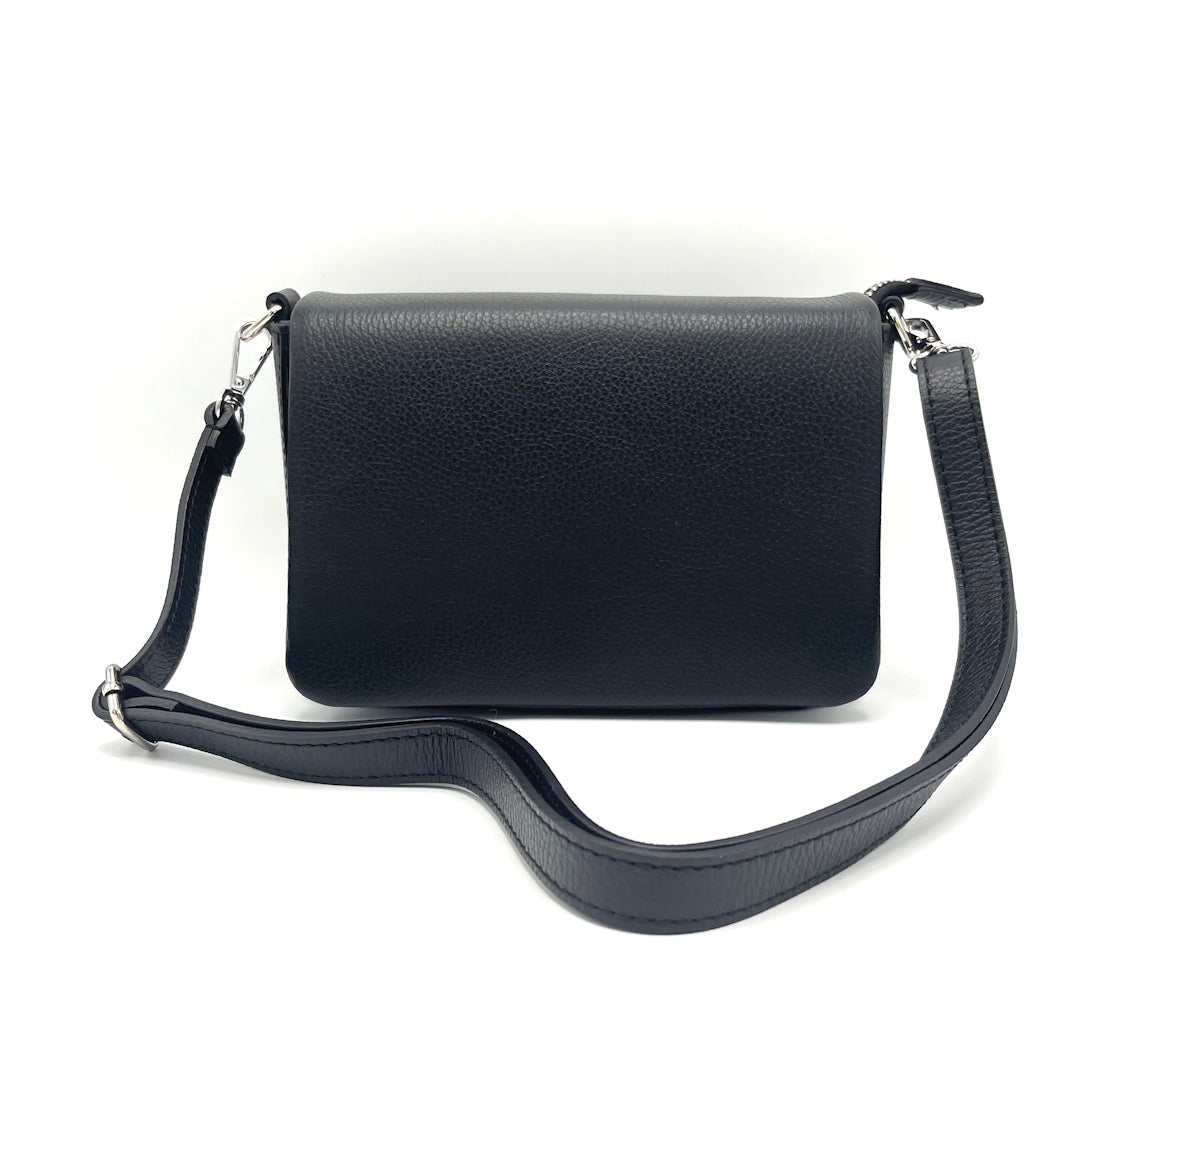 Genuine leather shoulder bag, for women, made in Italy, art. 112435